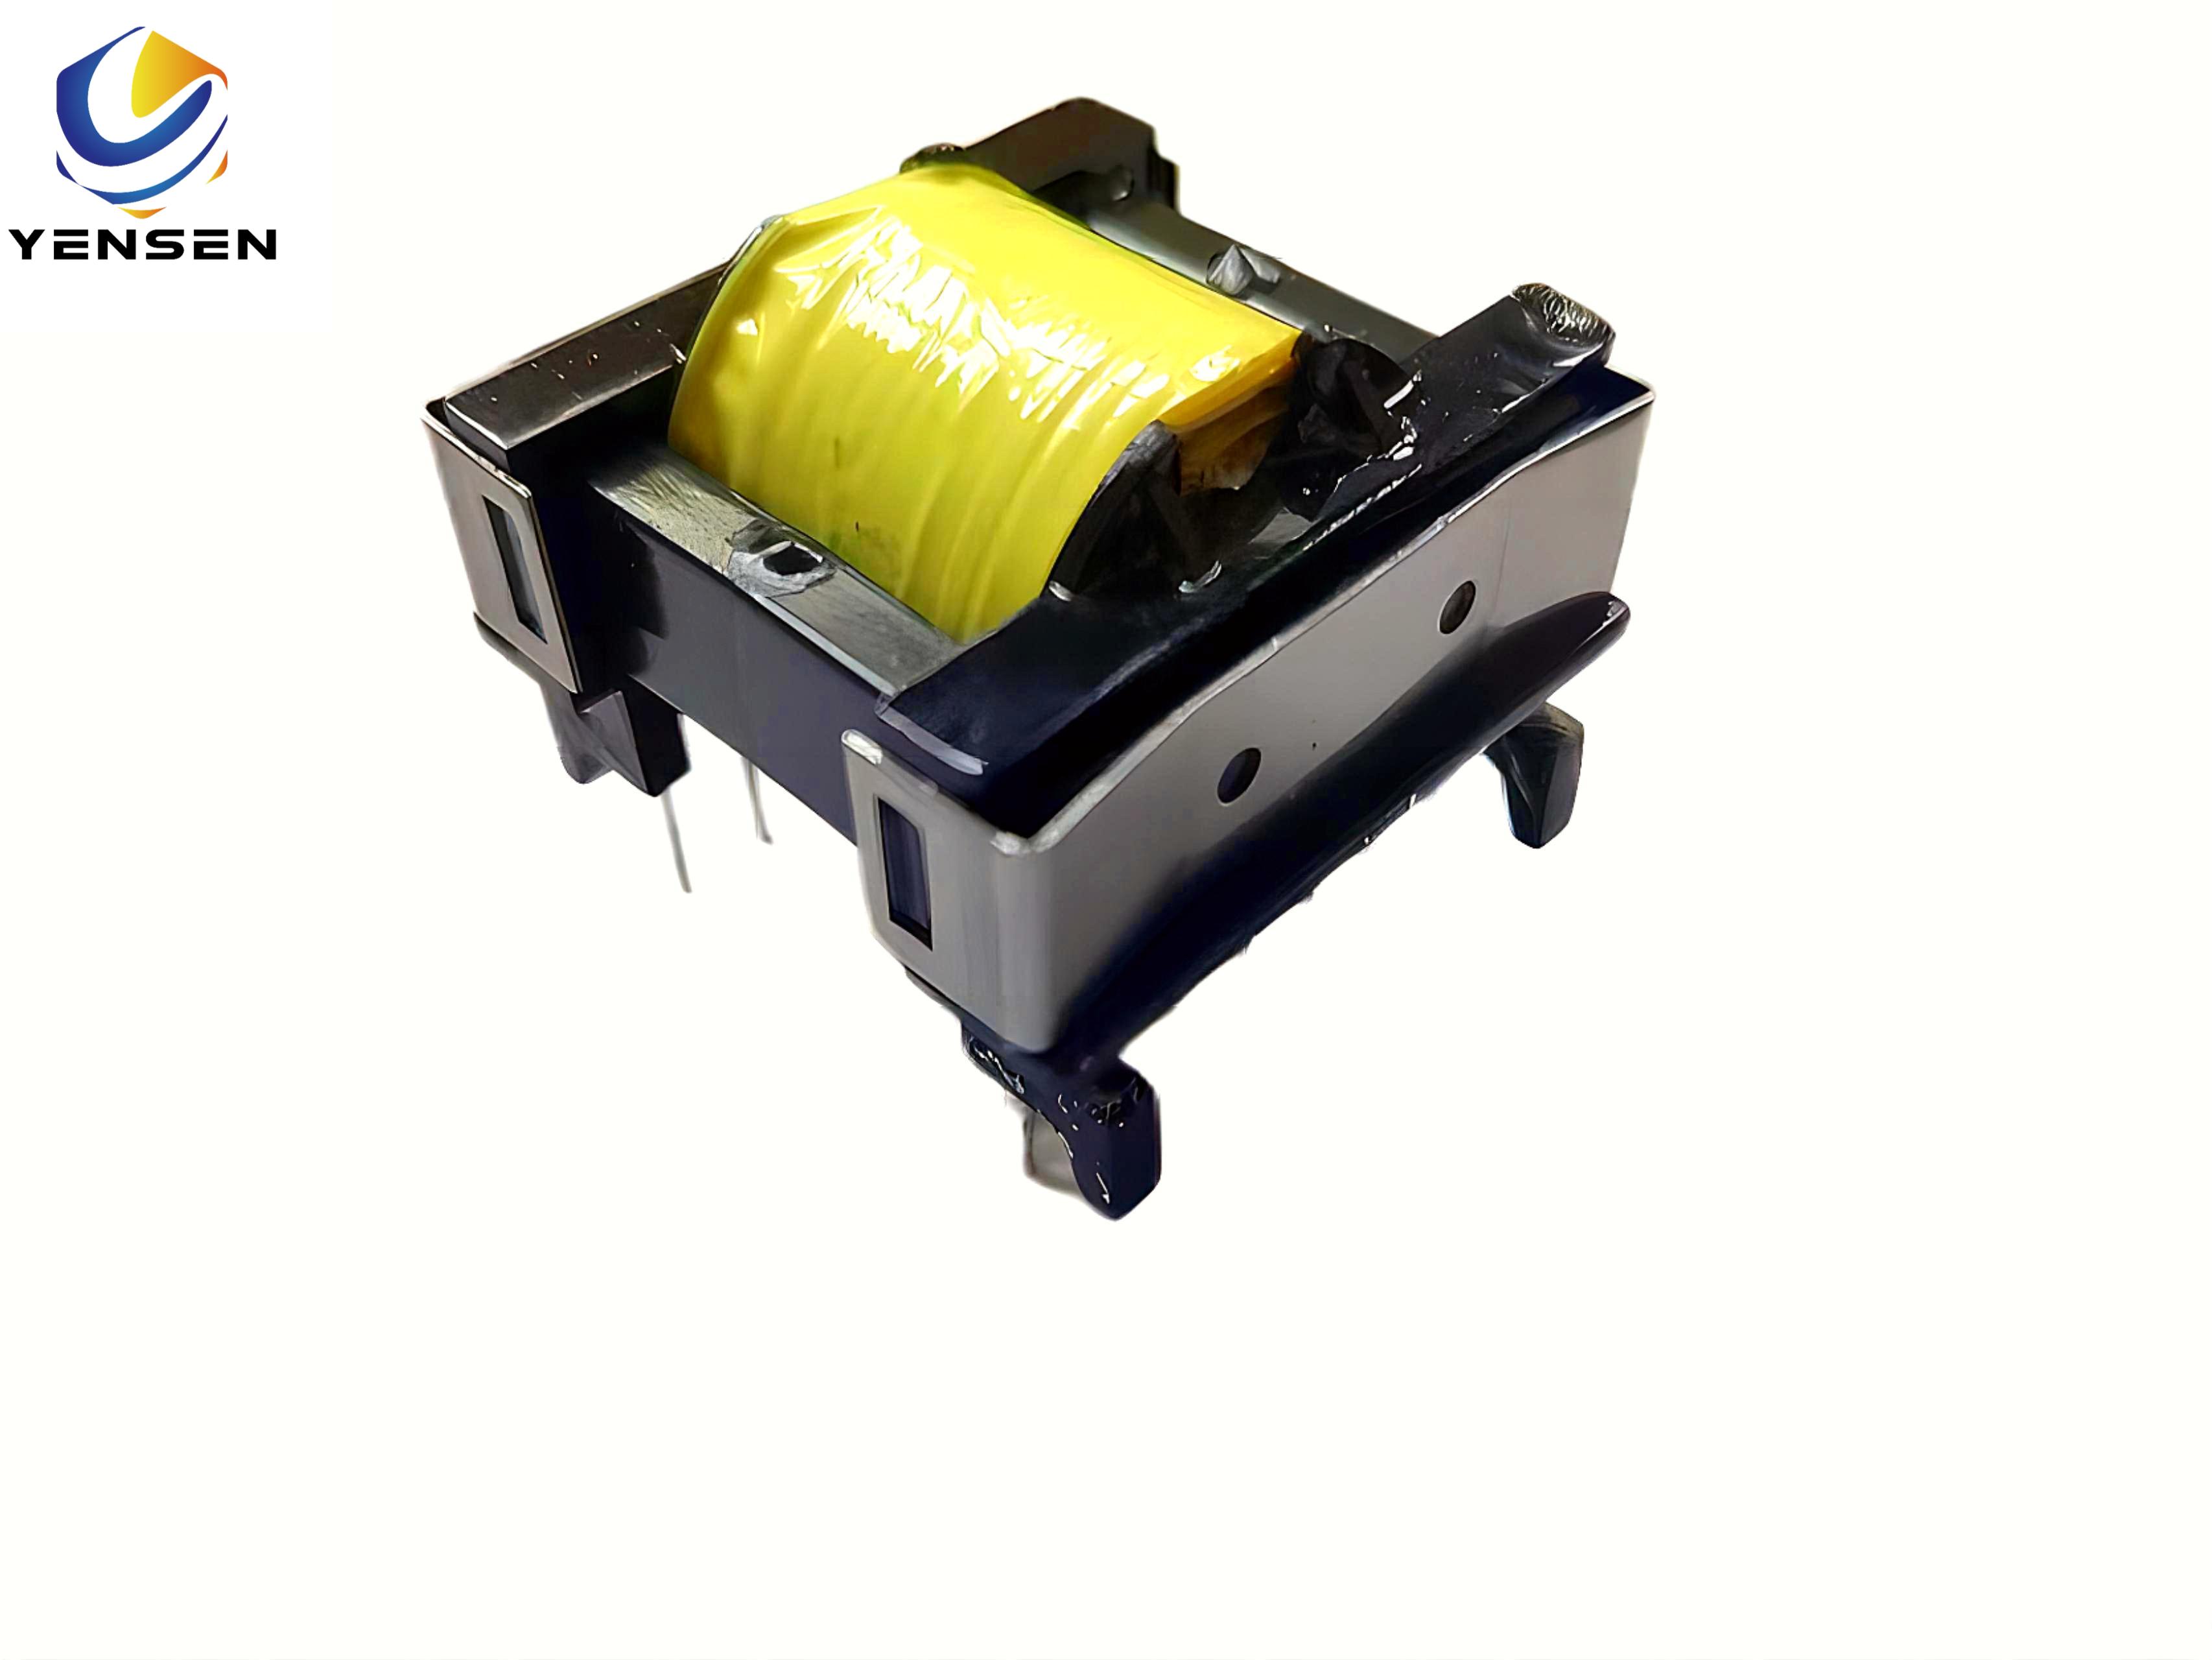 ETD44 Variable High Frequency 110 to 24 volt Transformer